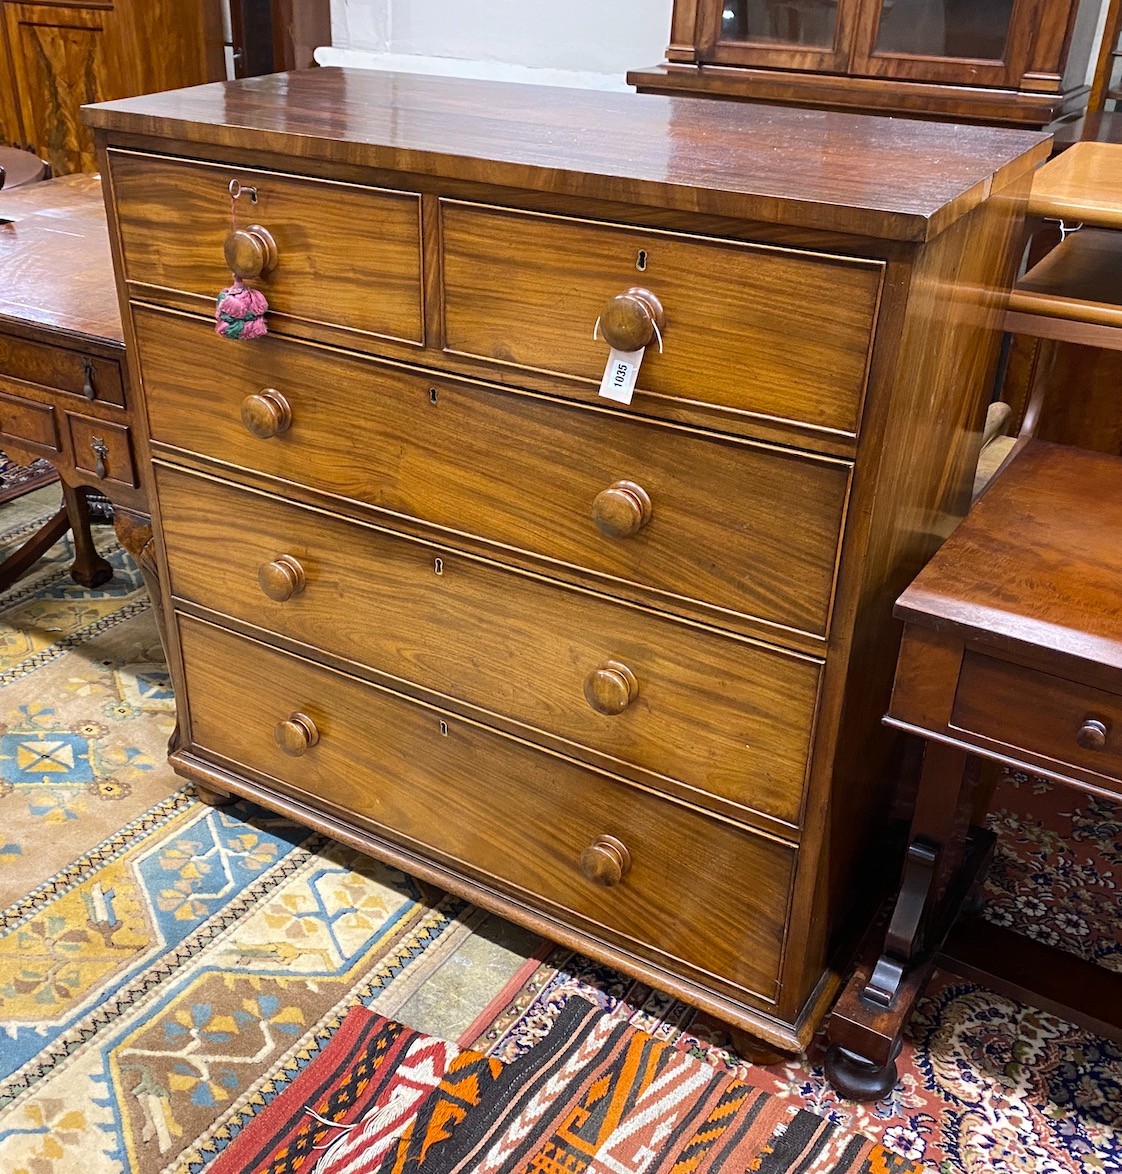 A Victorian mahogany chest of drawers, width 109cm, depth 50cm, height 112cm